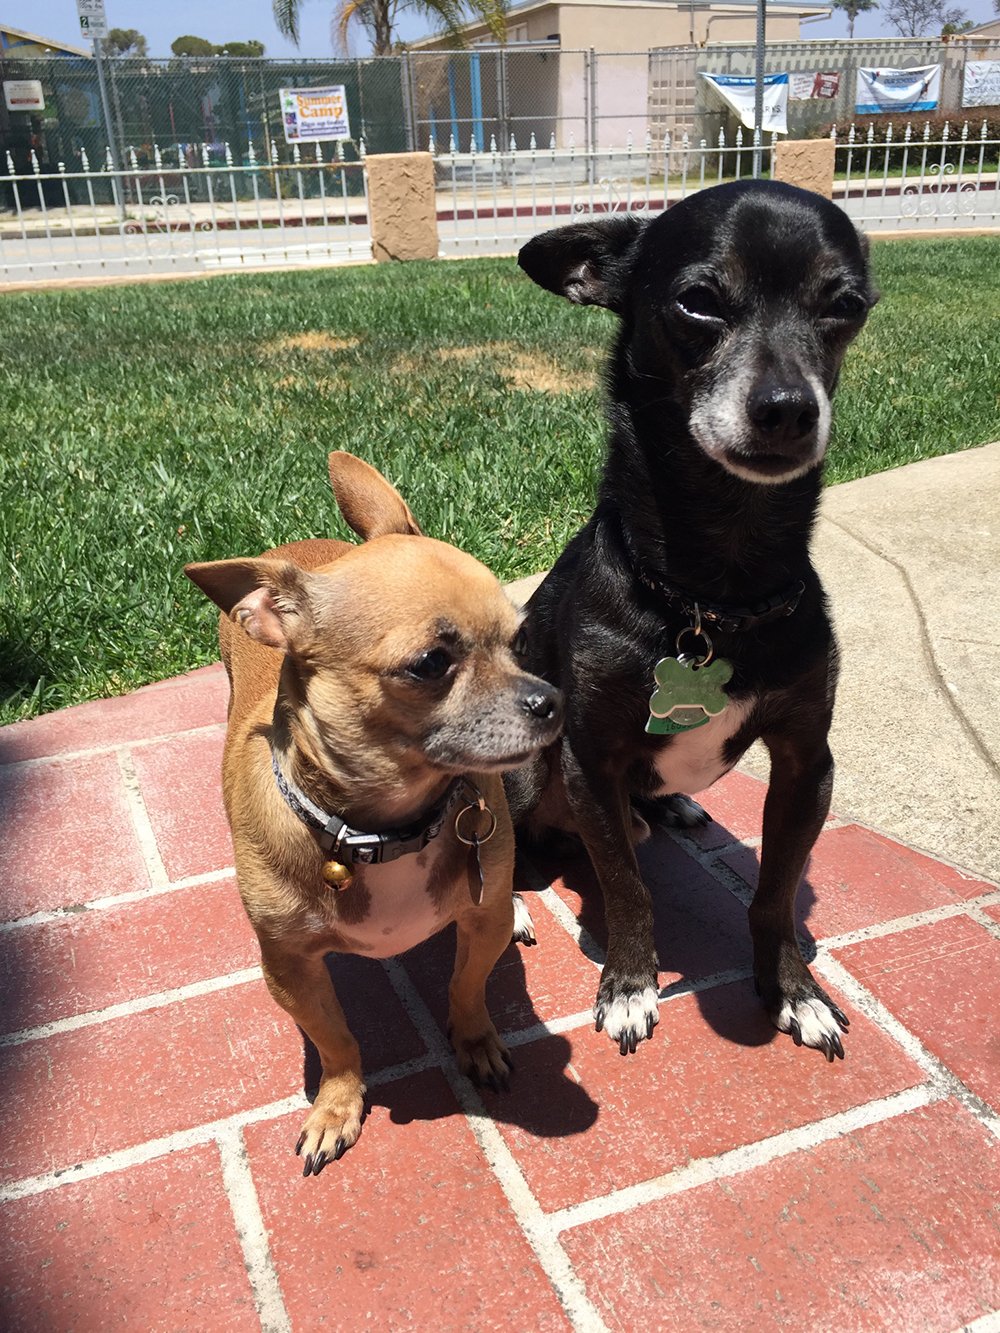 Chihuahua sitting next to another dog